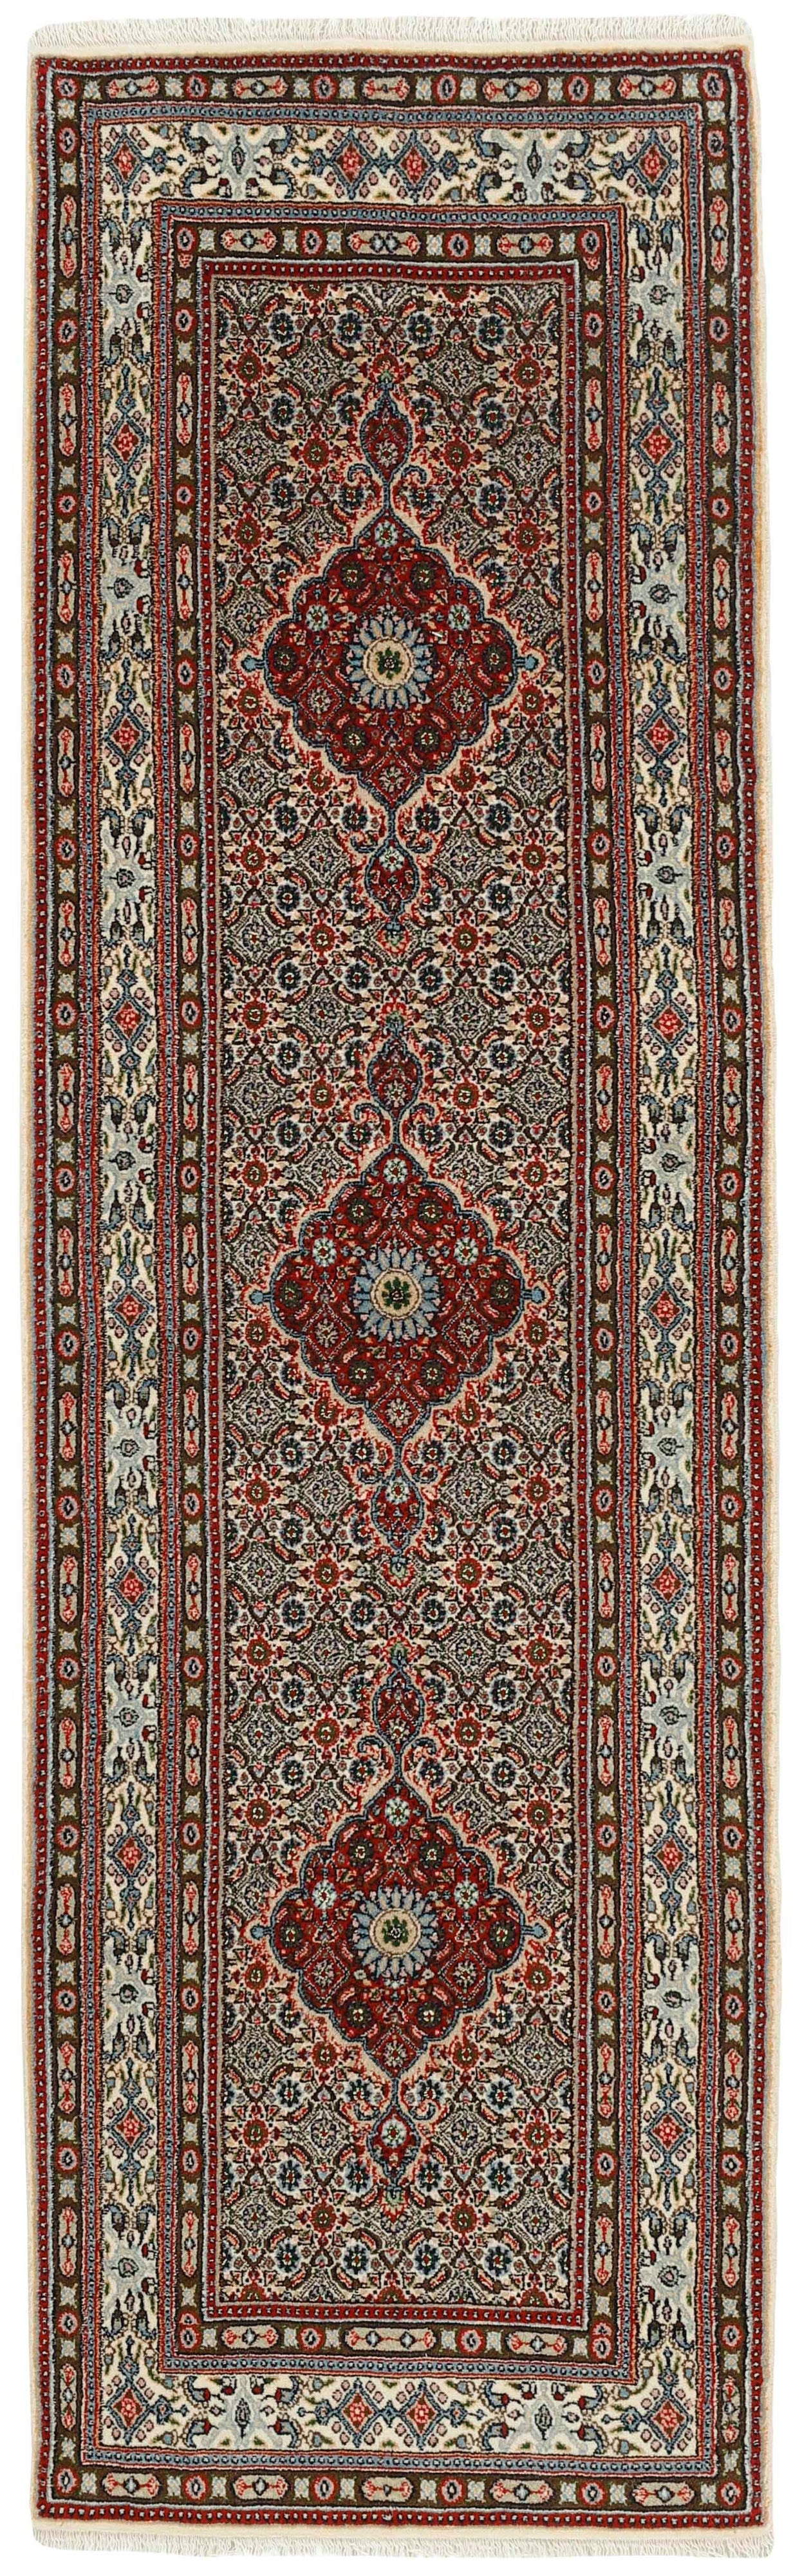 authentic persian runner with traditional floral pattern in red, pink, blue, green, beige, brown and black